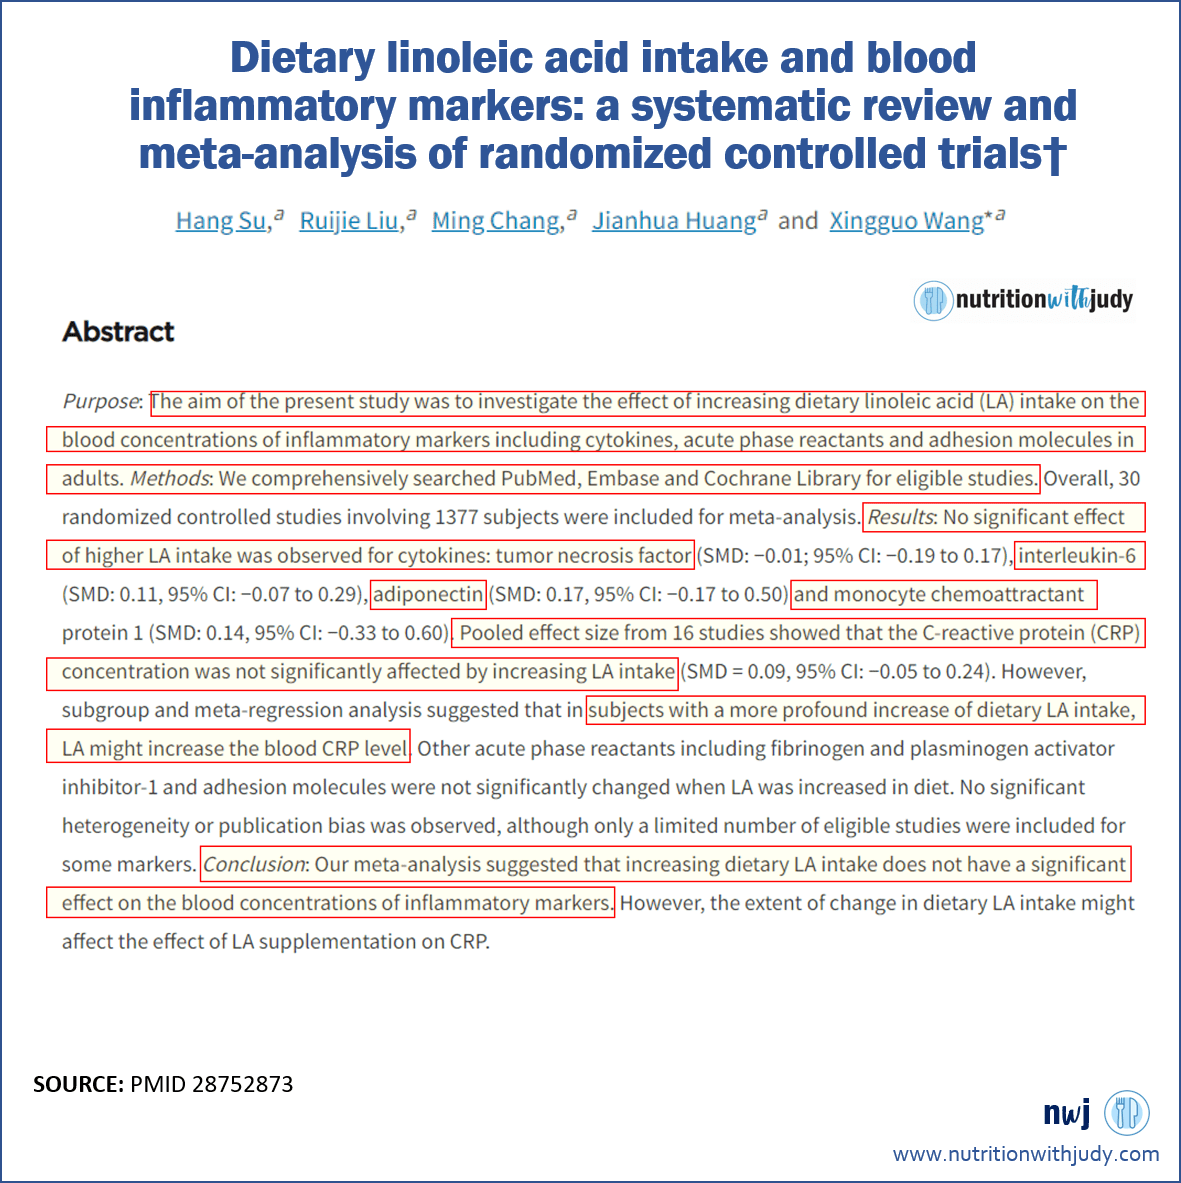 Dietary linoleic acid intake and blood inflammatory markers research